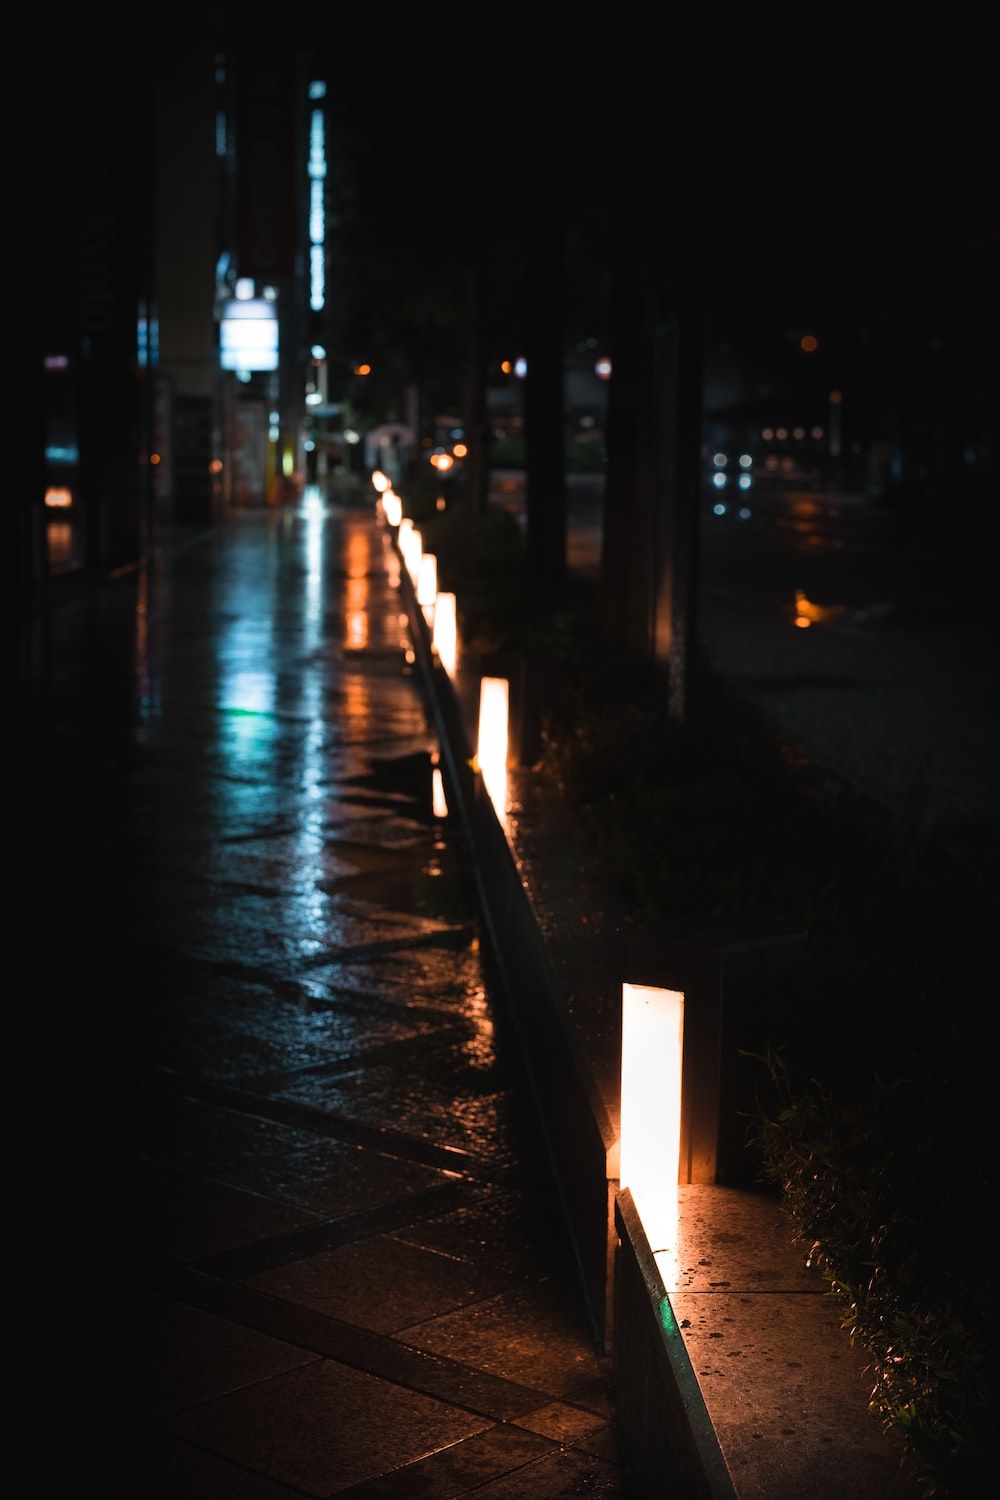 A row of lit posts along a wet sidewalk at night. - Night